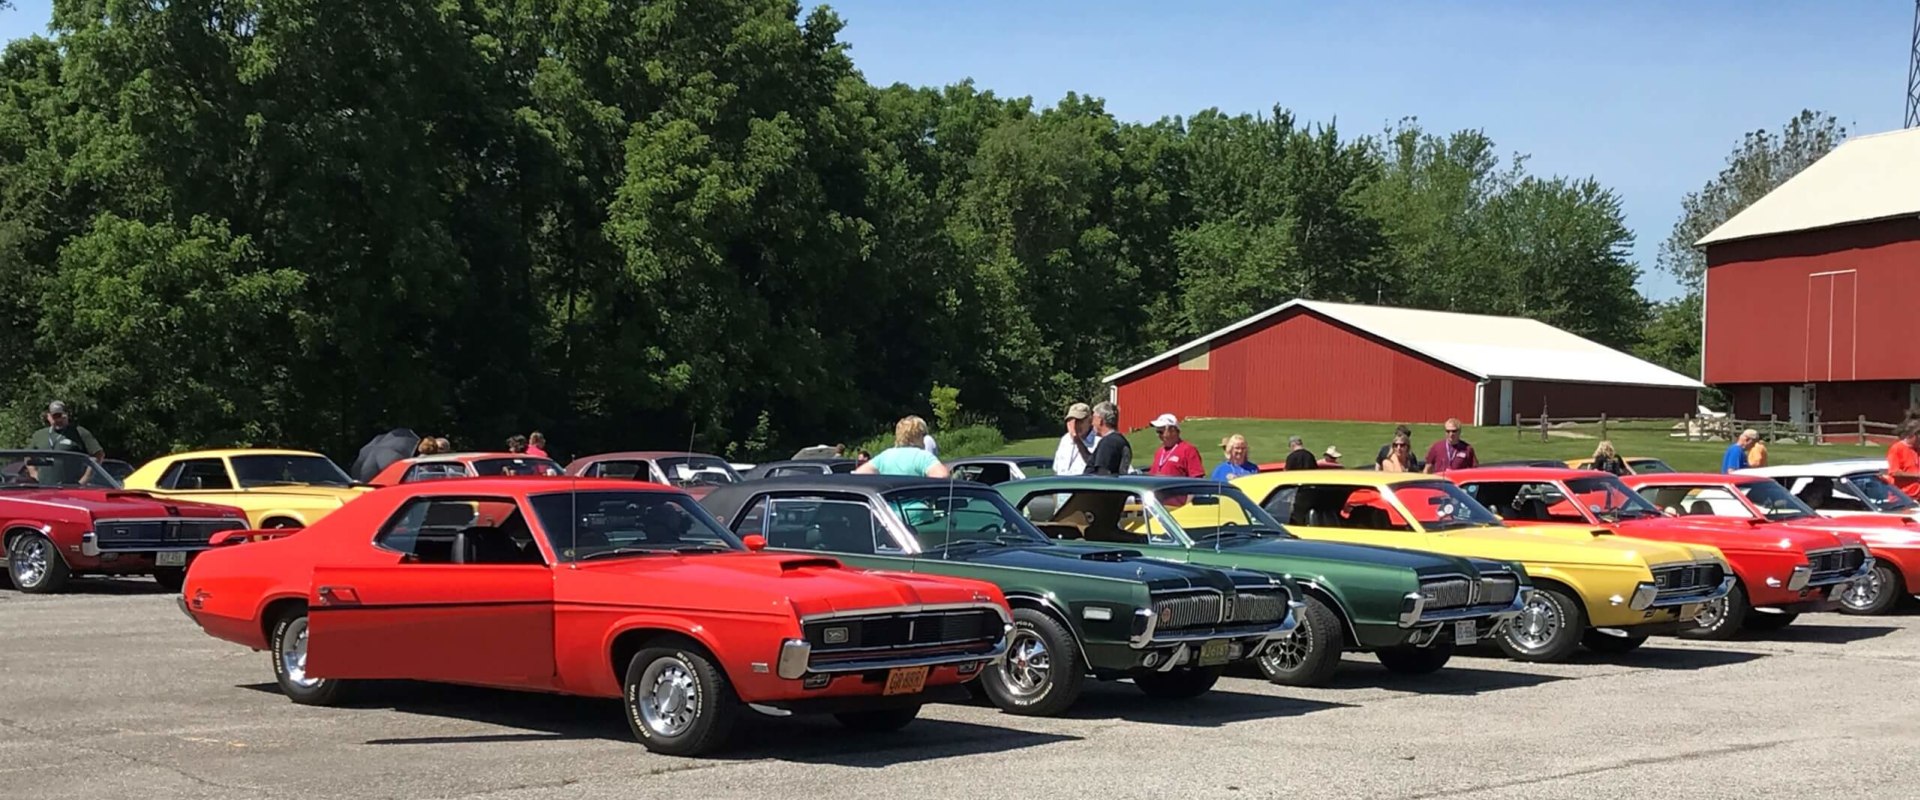 Are there any clubs or organizations dedicated to mopar classic cars?